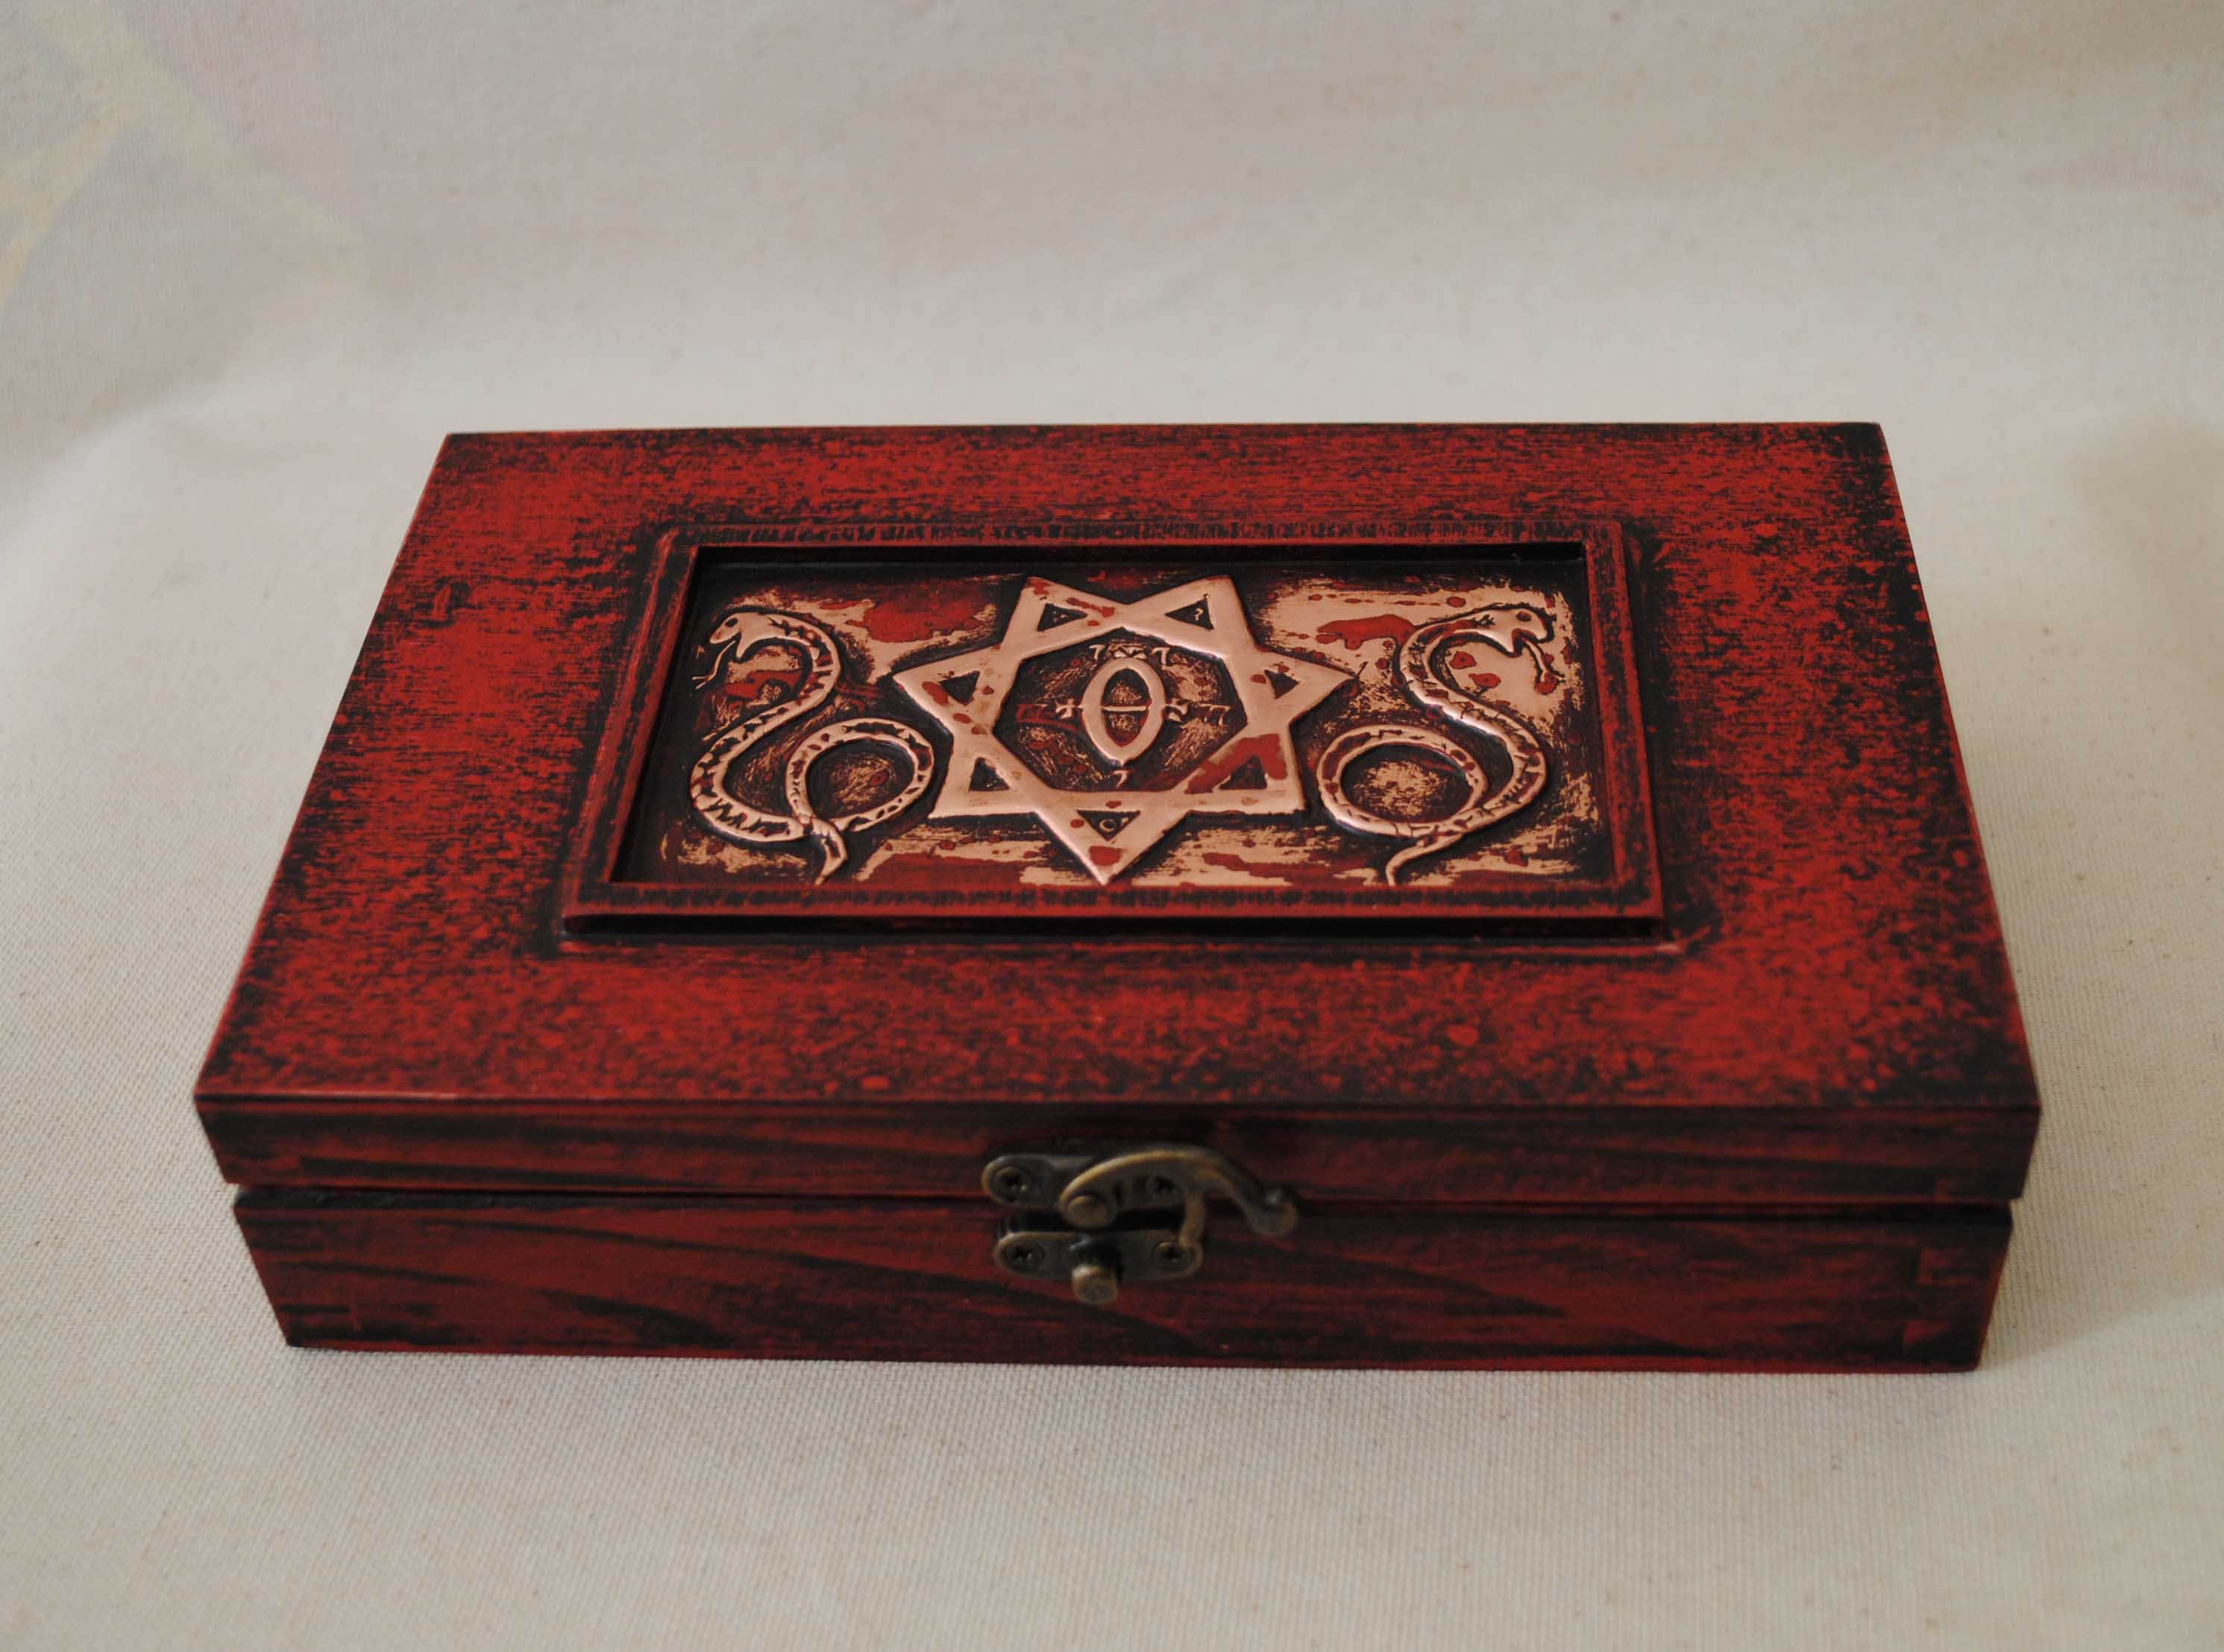 Babalon Septagram Seal Occult Jewelry Wooden box,Aleister Crowley Thelema 93 Symbol Scarlet Woman 156